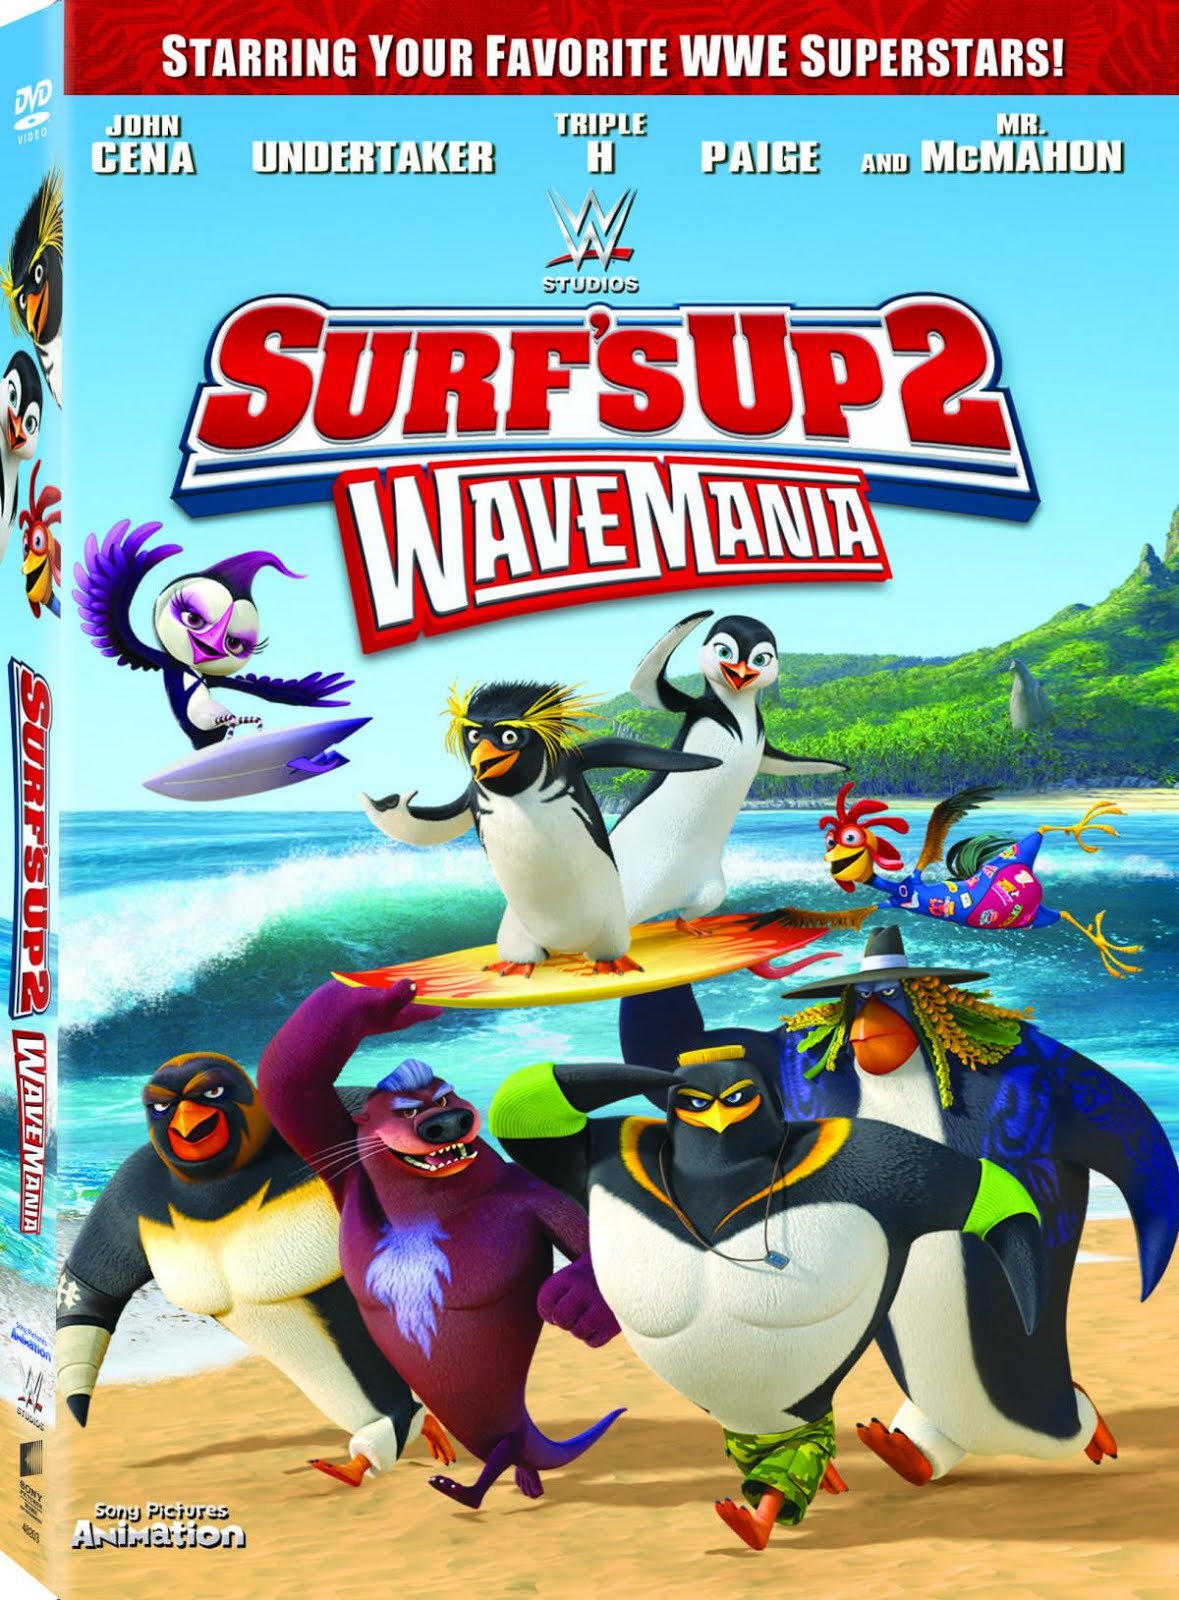 Image result for surfs up 2 wavemania 2017